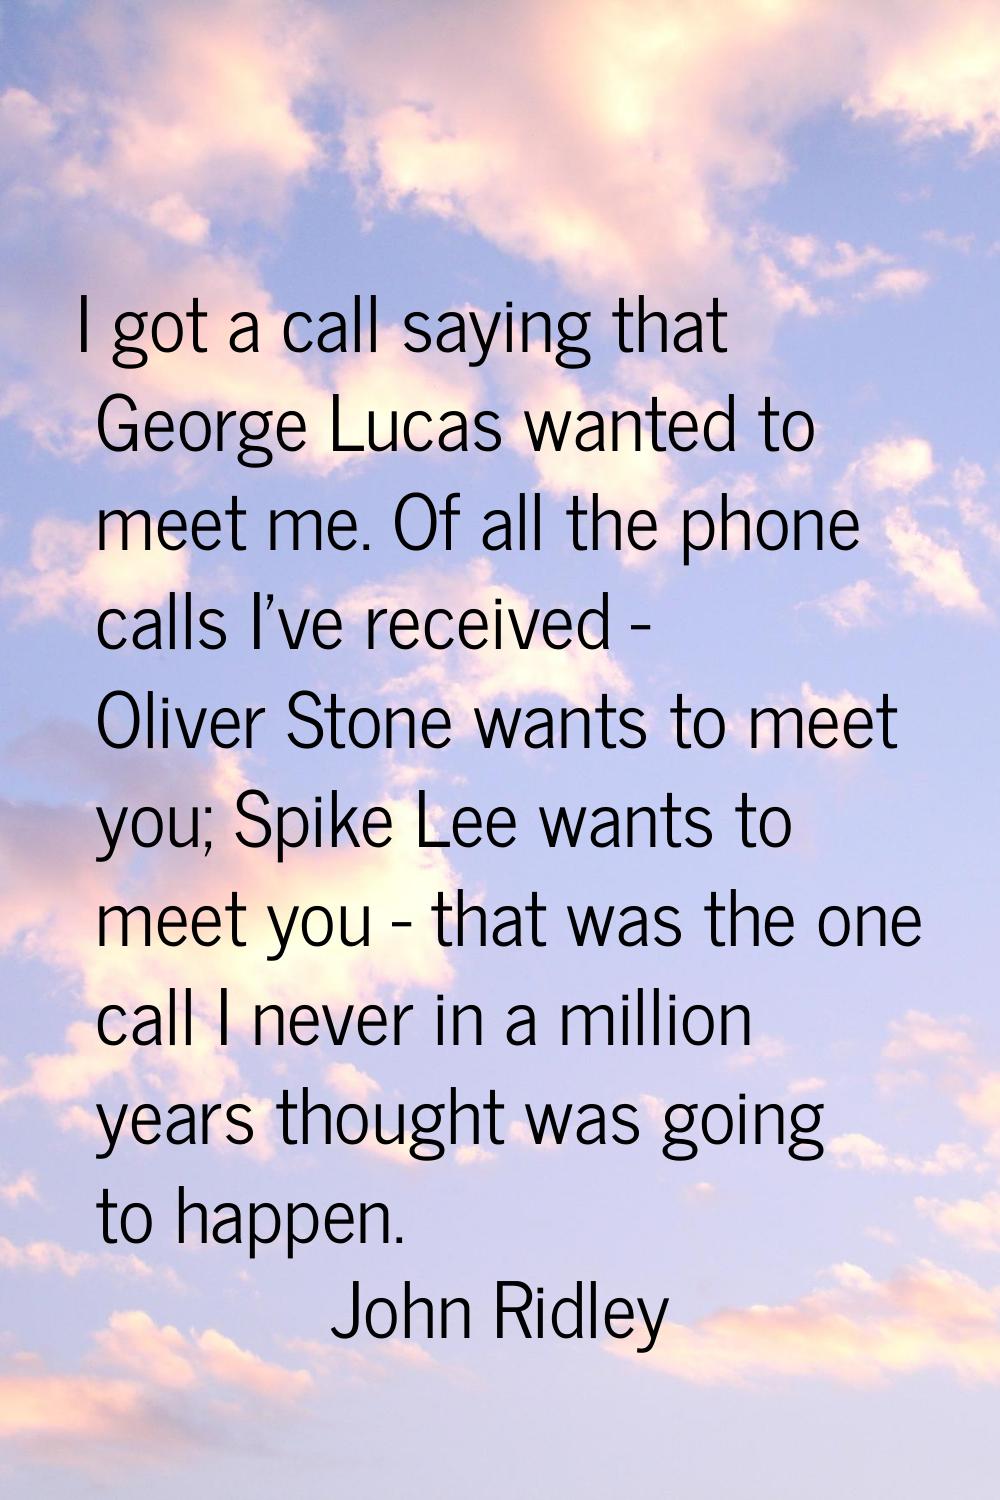 I got a call saying that George Lucas wanted to meet me. Of all the phone calls I've received - Oli